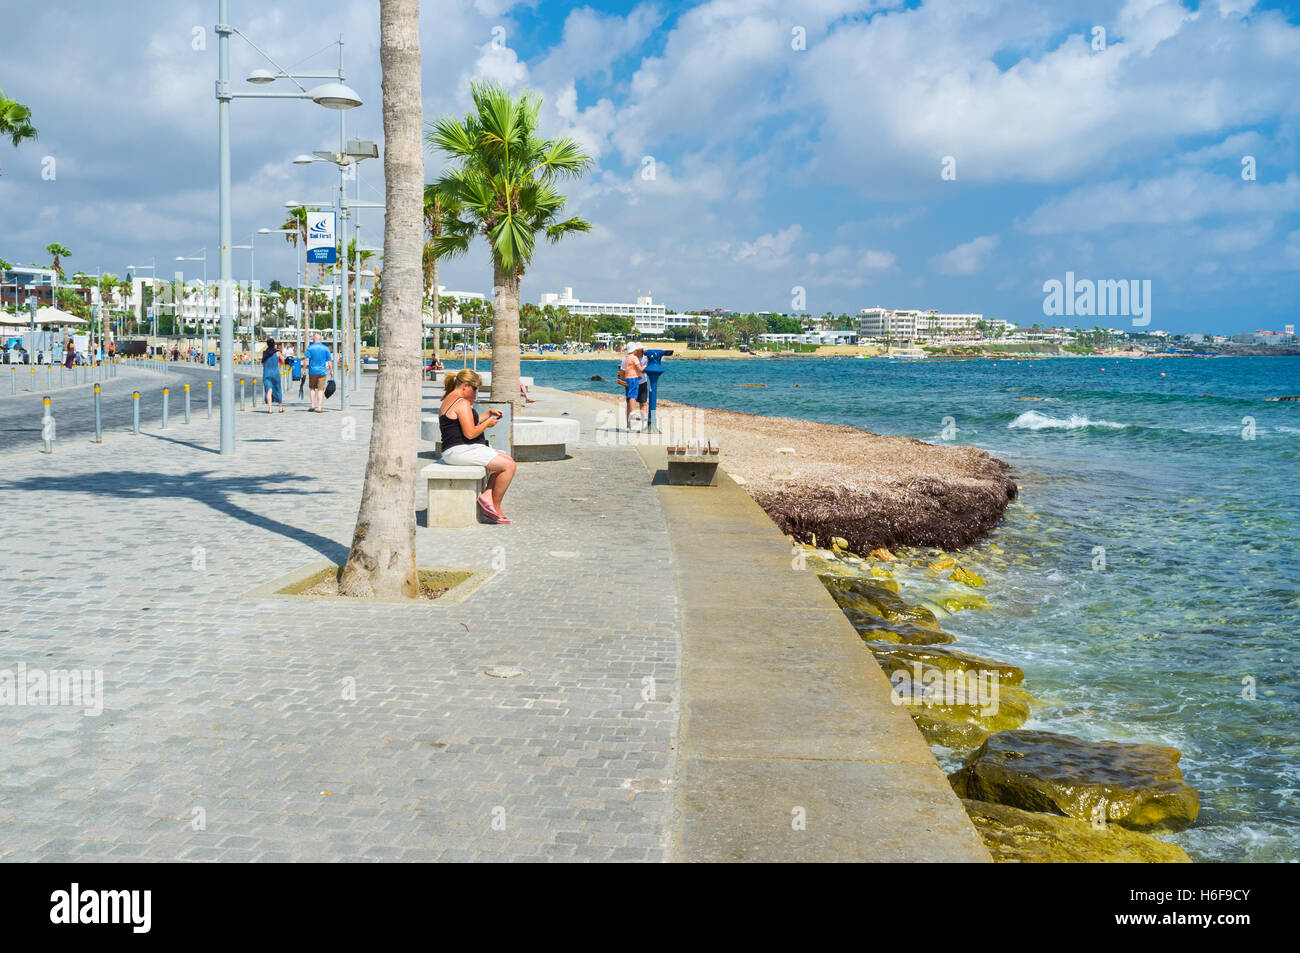 The Poseidonos Ave is the main city promenade and the best place for daily walks, Pafos, Cyprus Stock Photo